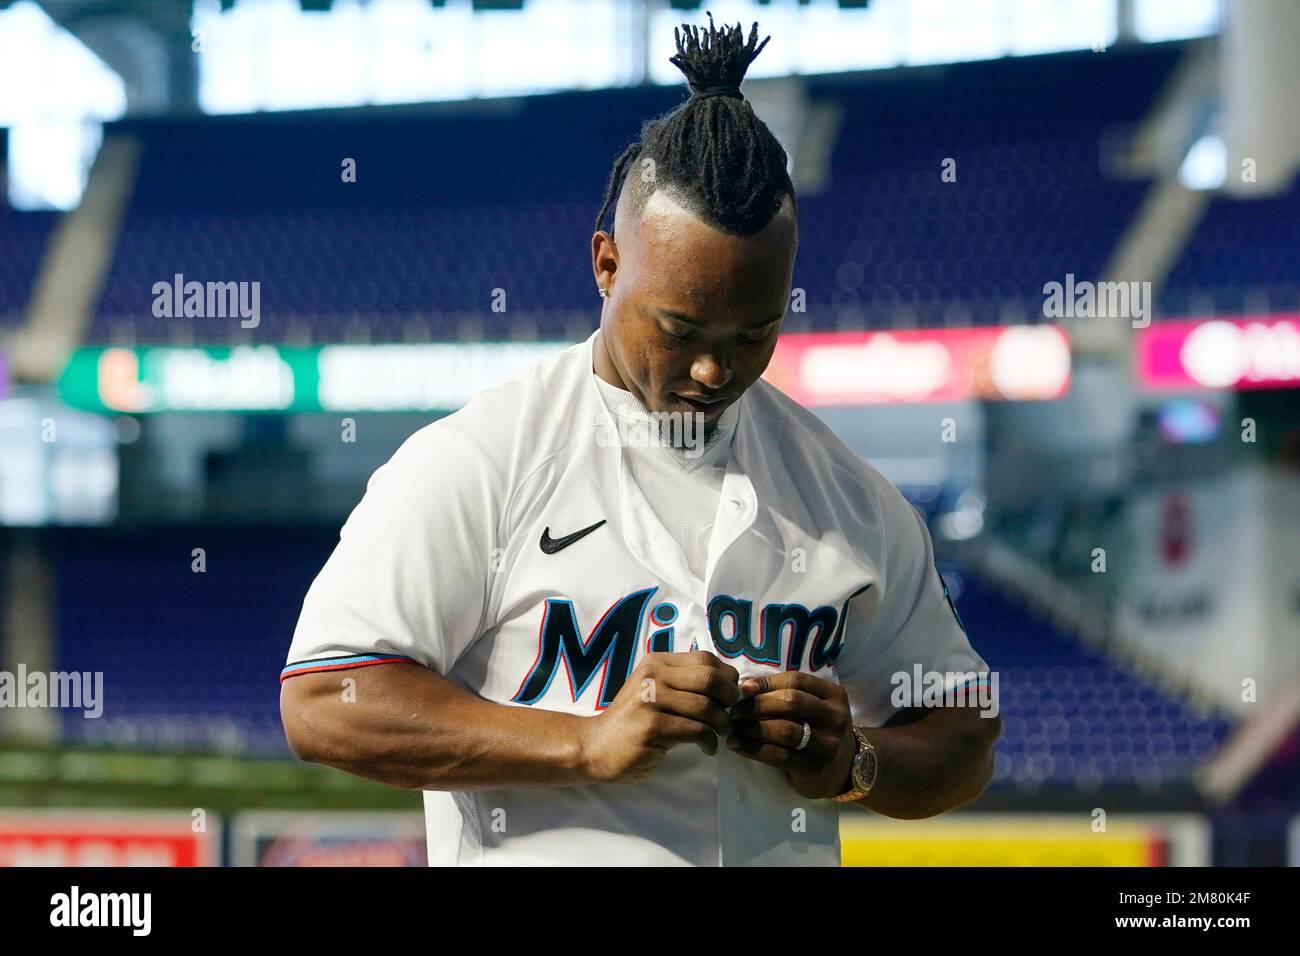 Miami Marlins baseball infielder Jean Segura puts on a Marlins jersey  before posing for a photograph, Wednesday, Jan. 11, 2023, in Miami. Segura  recently signed a two-year deal with the Marlins. (AP